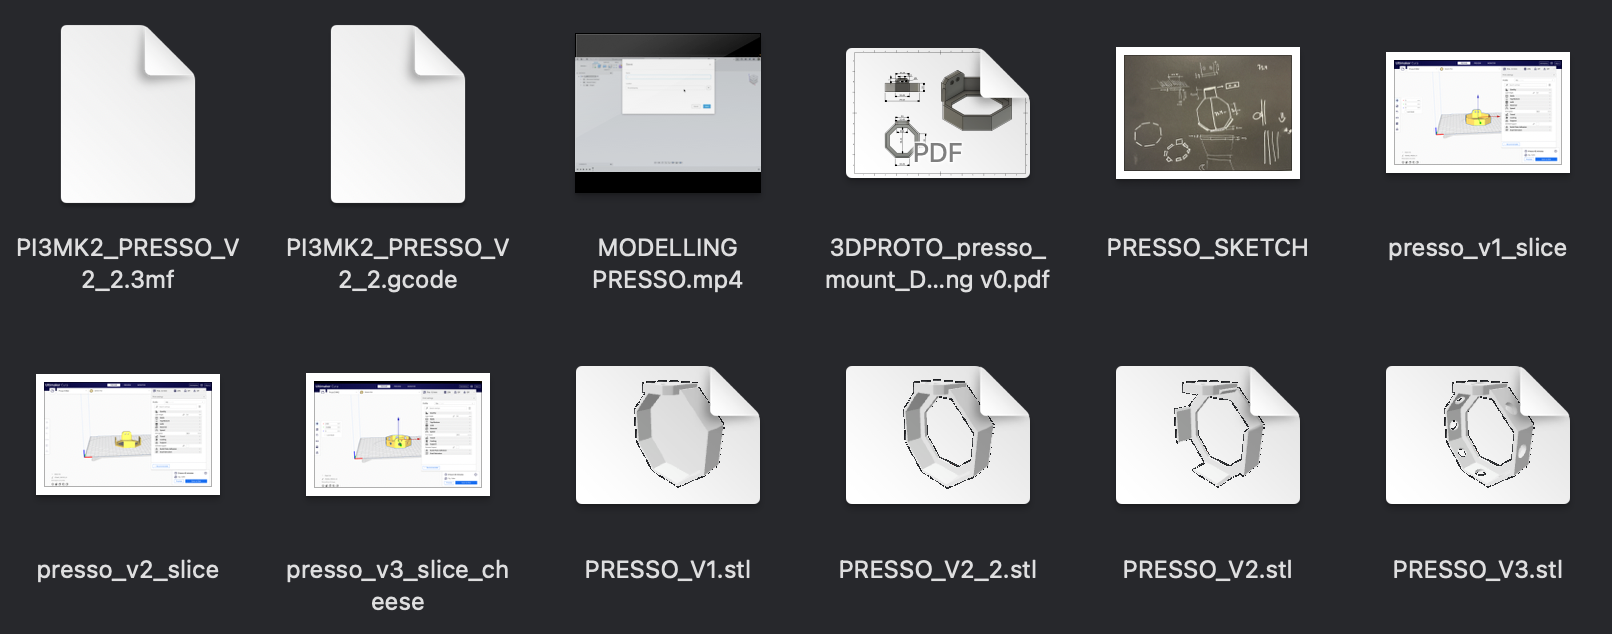 This thumbnail shows all the files in presso_all.zip except for the video.'
Included is stl, 3mf, gcode, drawing, sketch.